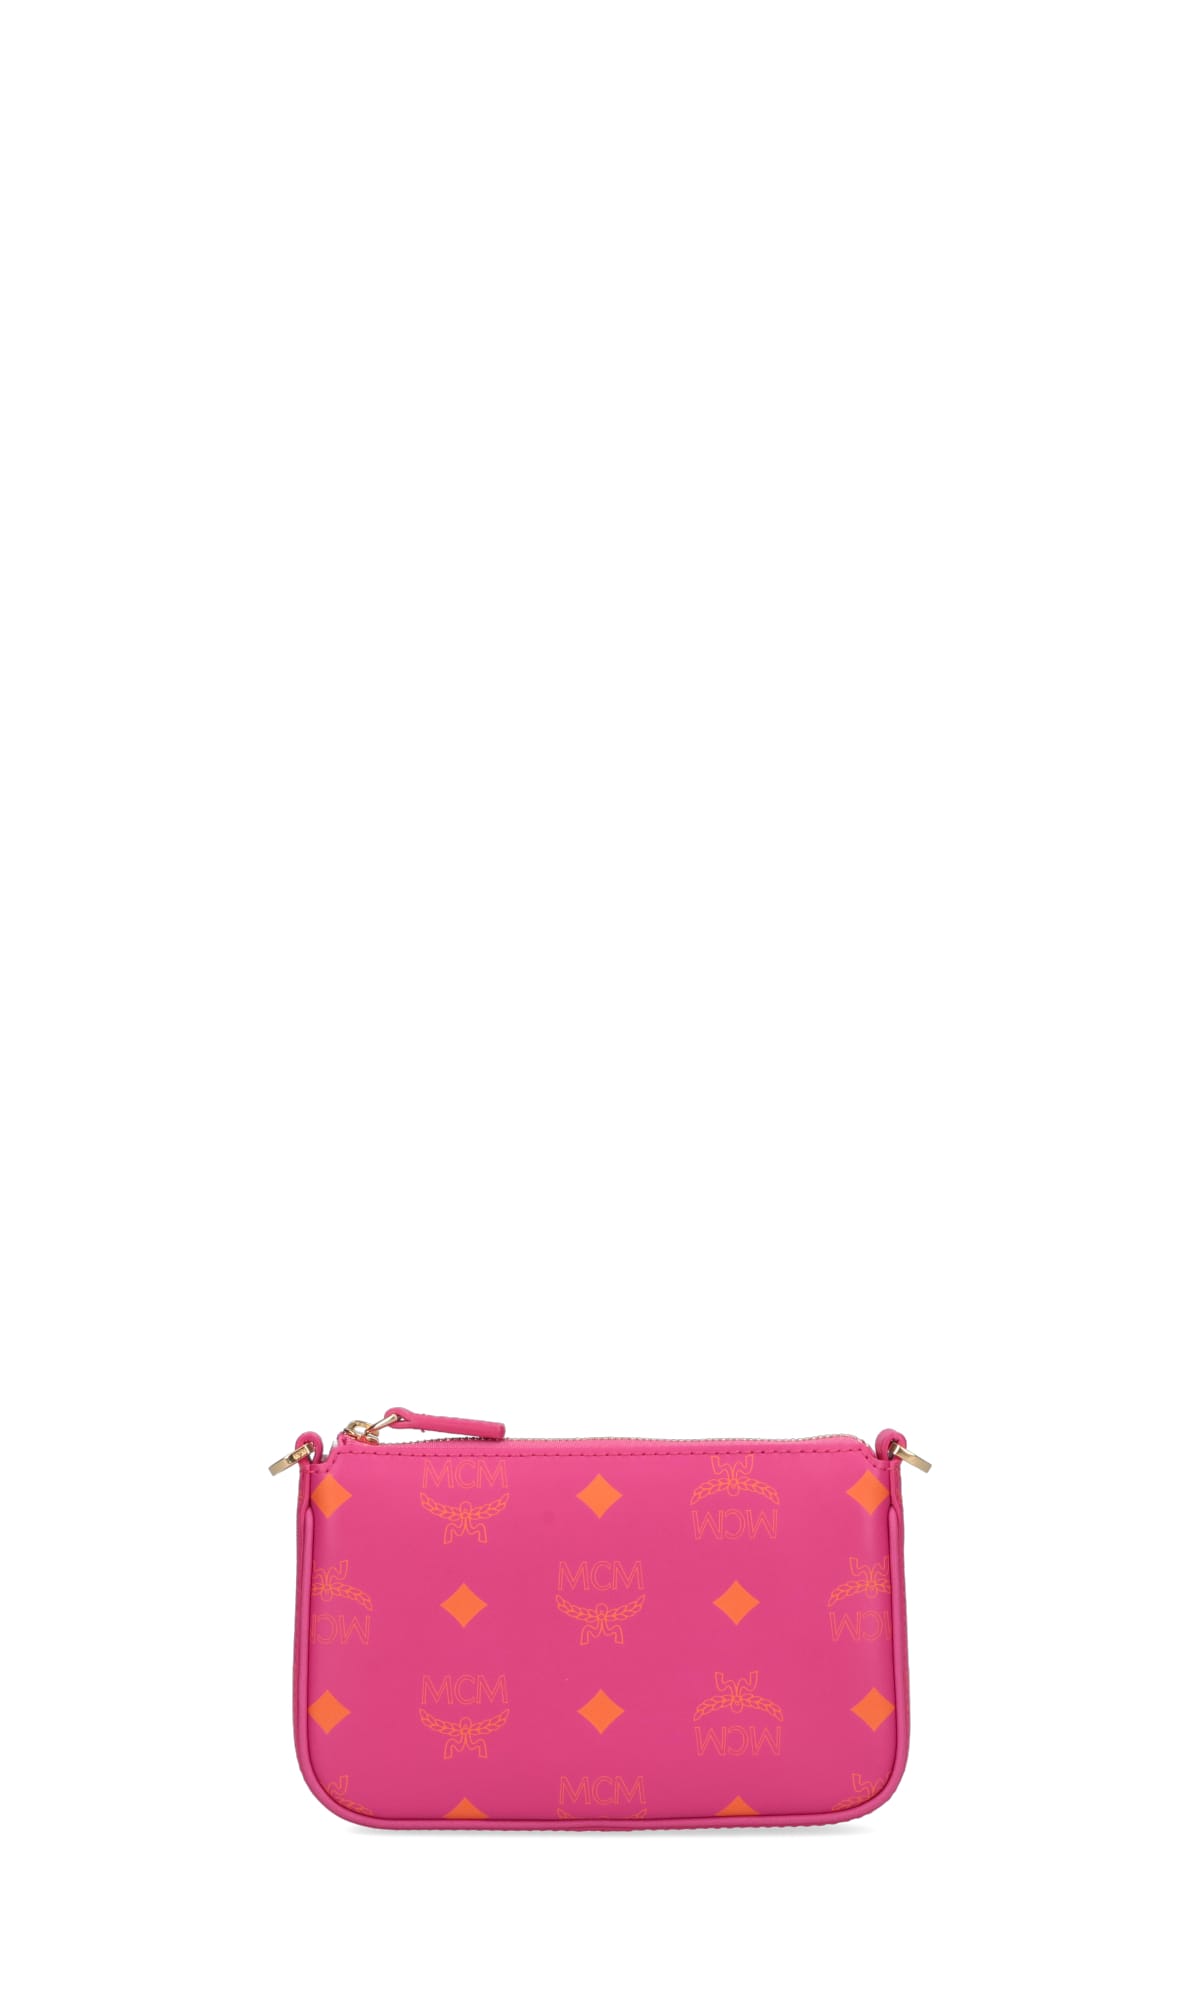 Mcm Clutch In Pink